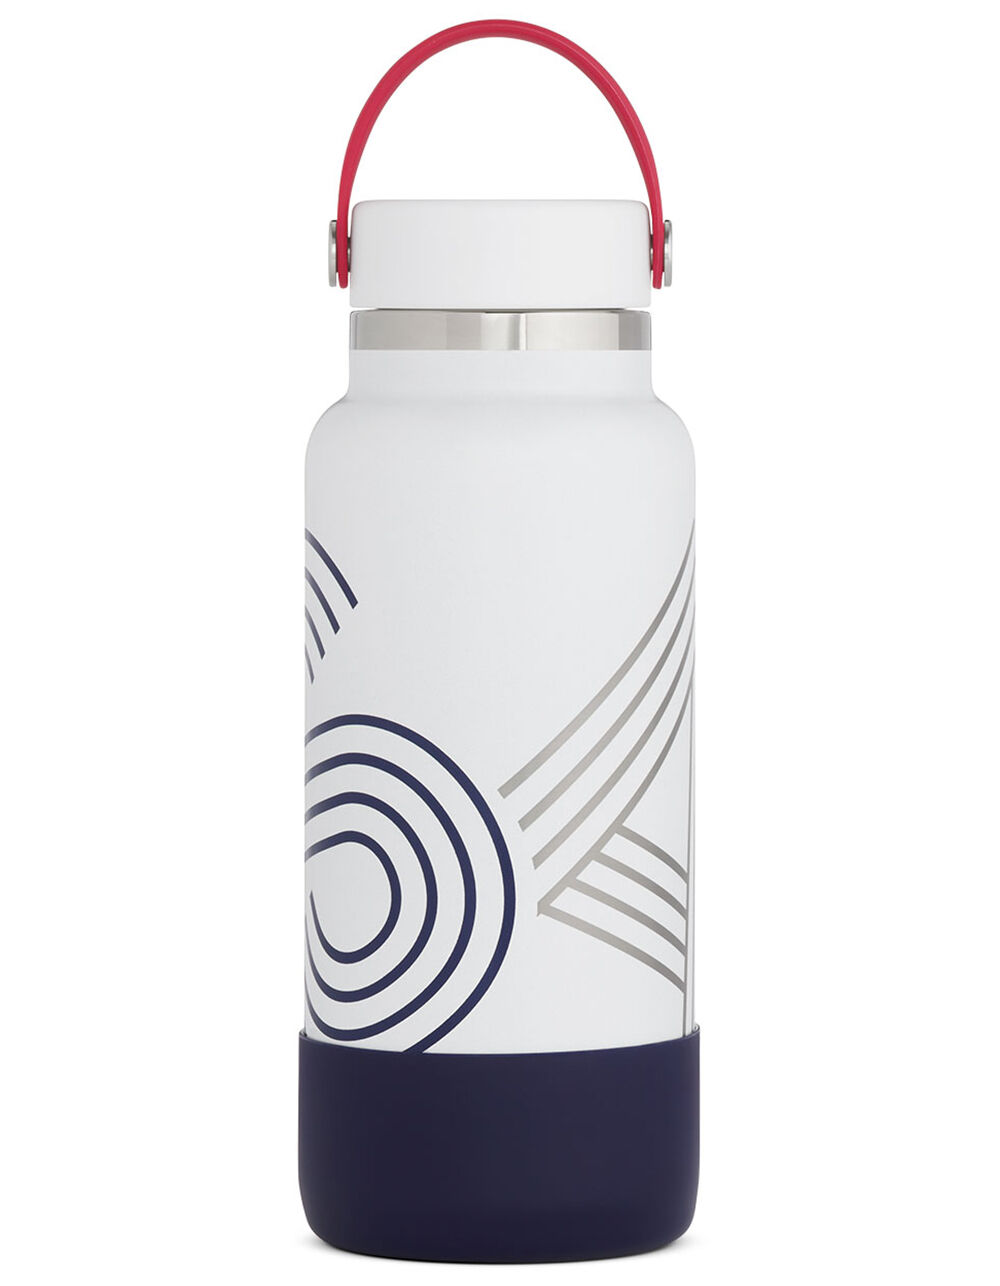 Hydro Flask - 32oz Wide Mouth - Agave – The Brokedown Palace